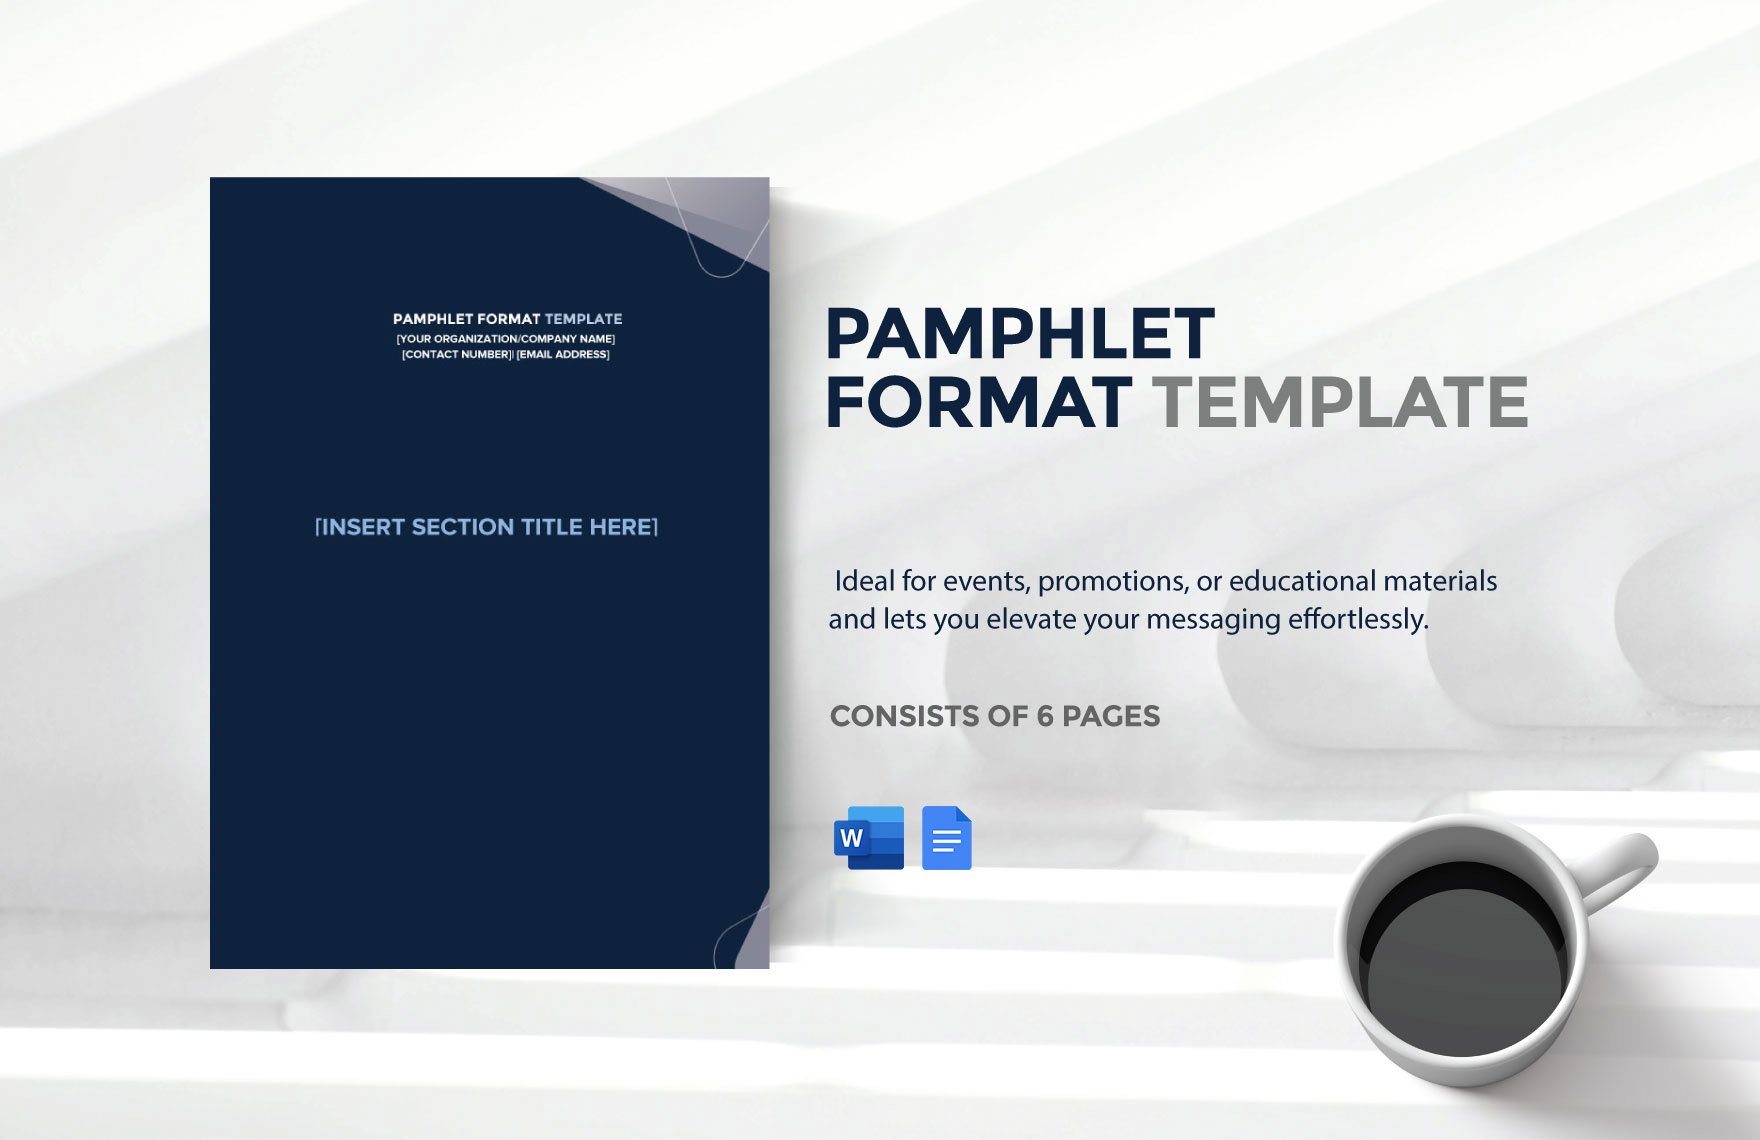 Free Pamphlet Format Template in Word, Google Docs